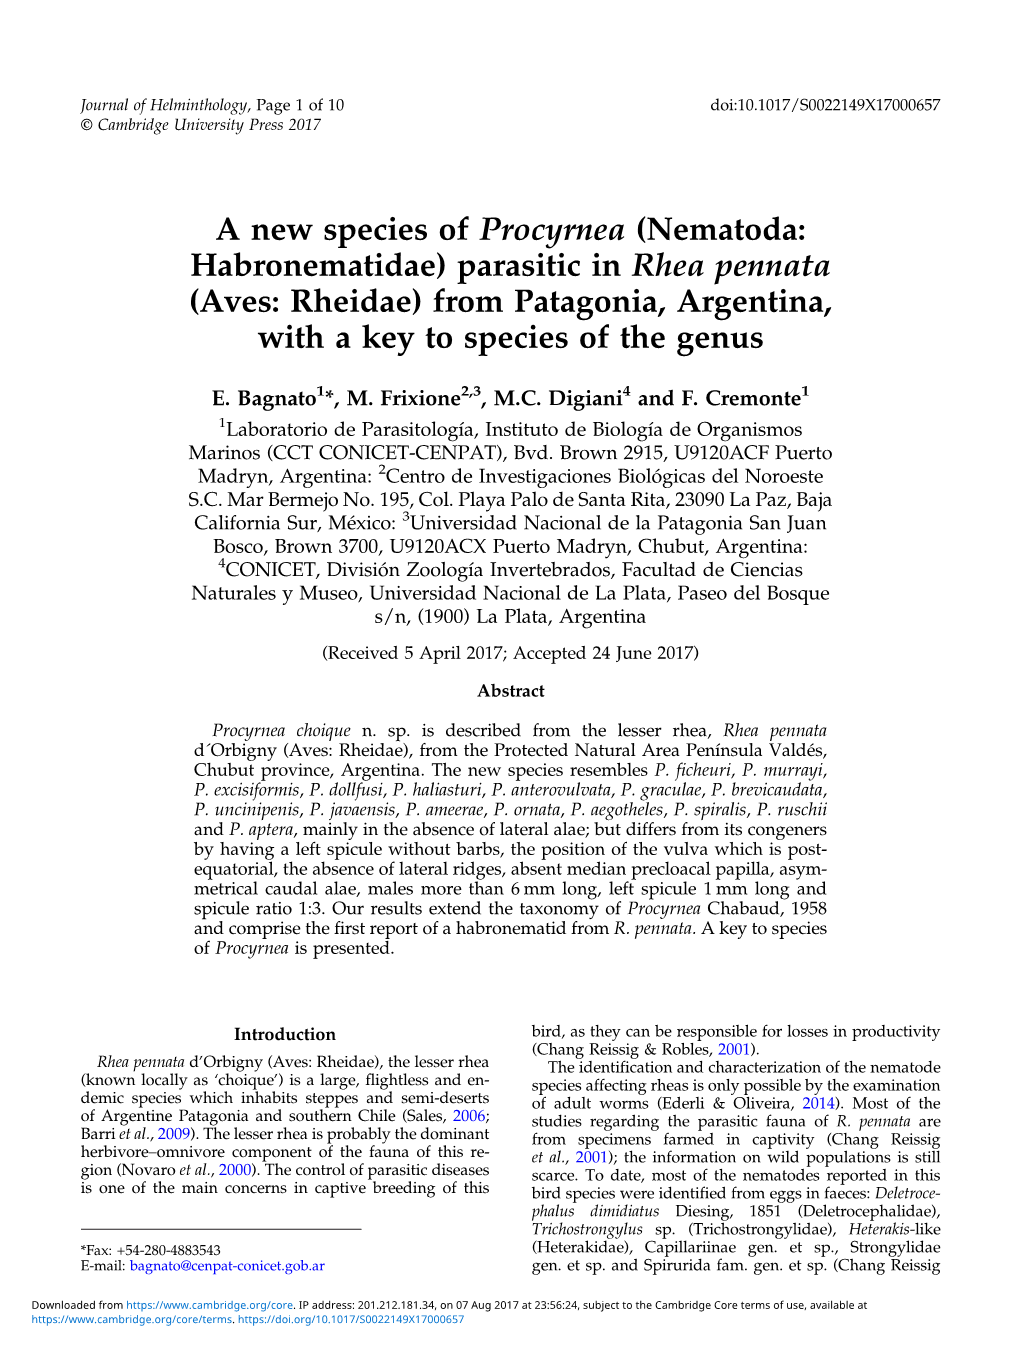 A New Species of Procyrnea (Nematoda: Habronematidae) Parasitic in Rhea Pennata (Aves: Rheidae) from Patagonia, Argentina, with a Key to Species of the Genus